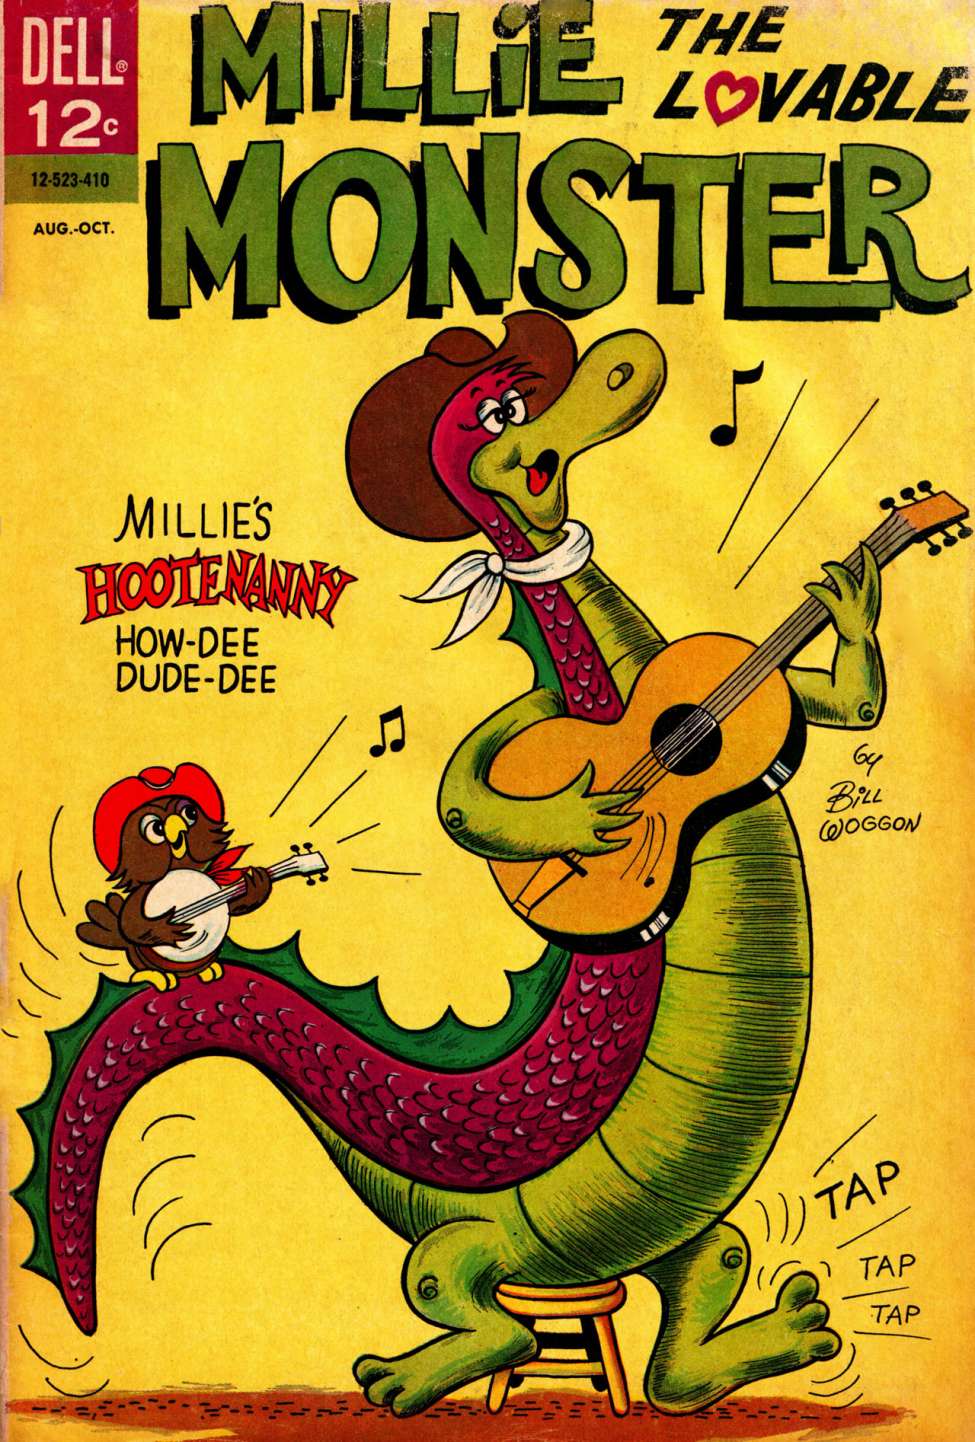 Comic Book Cover For Millie the Lovable Monster 3